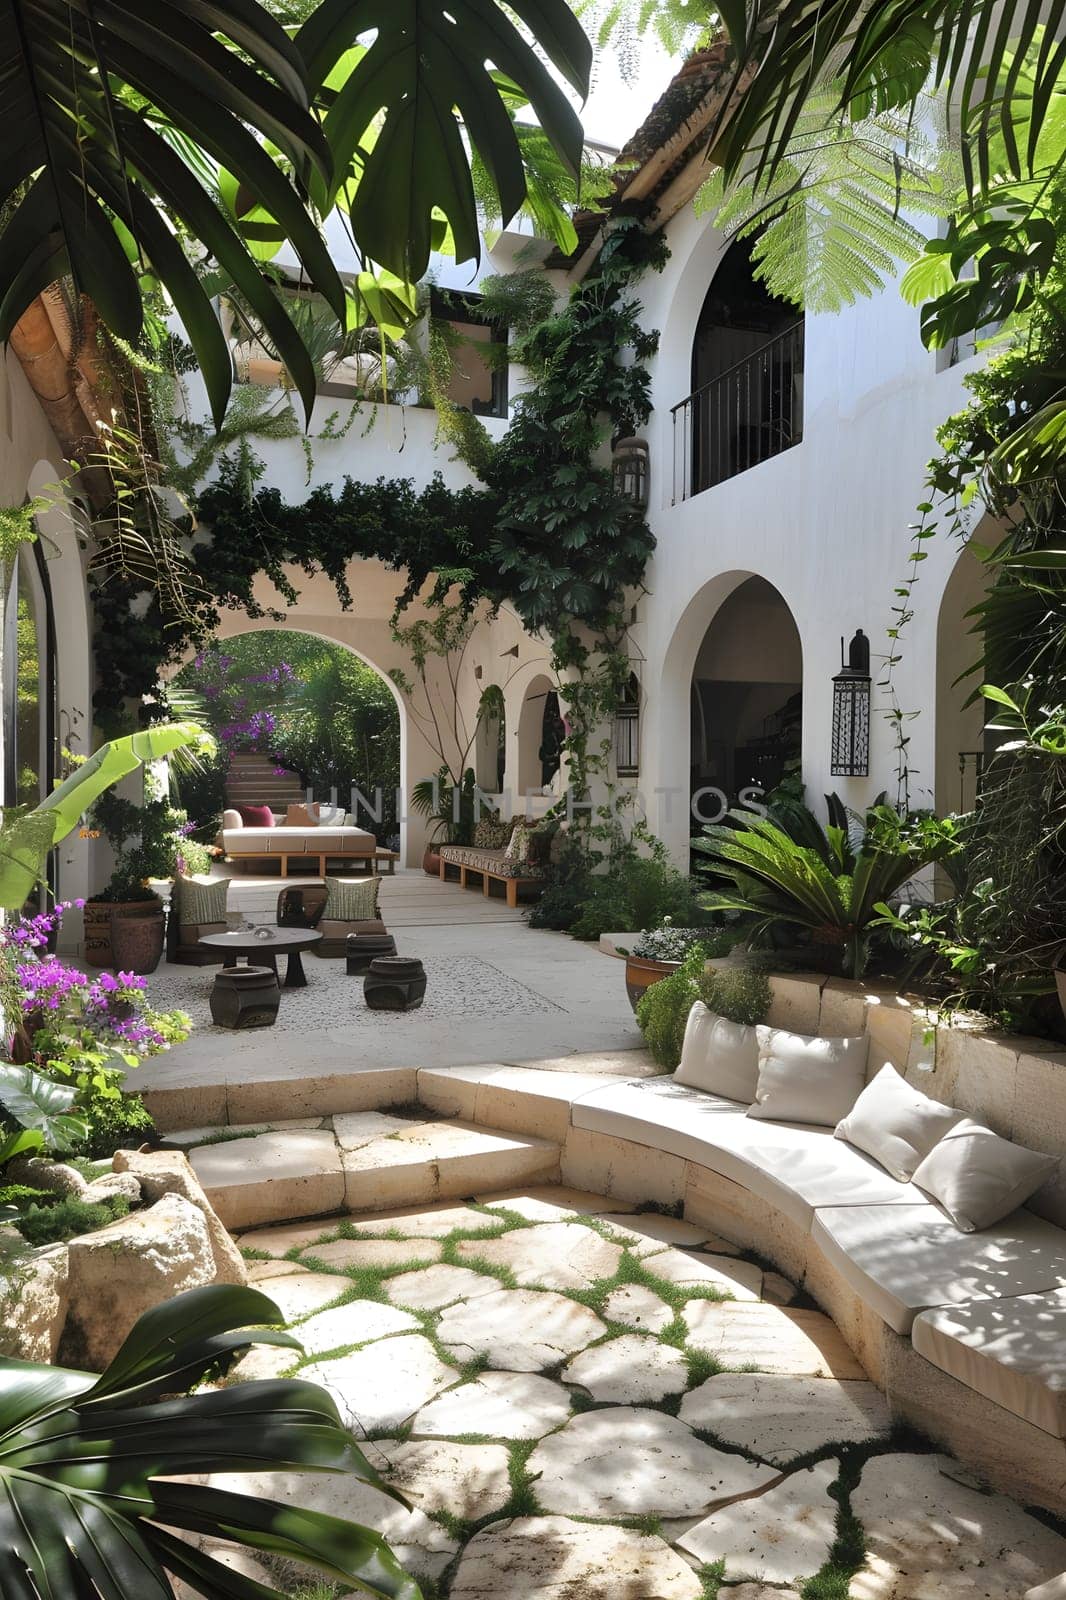 A landscaped courtyard featuring a curved couch in the center surrounded by lush green grass, trees, and potted plants, creating a serene outdoor space in front of a beautiful building facade